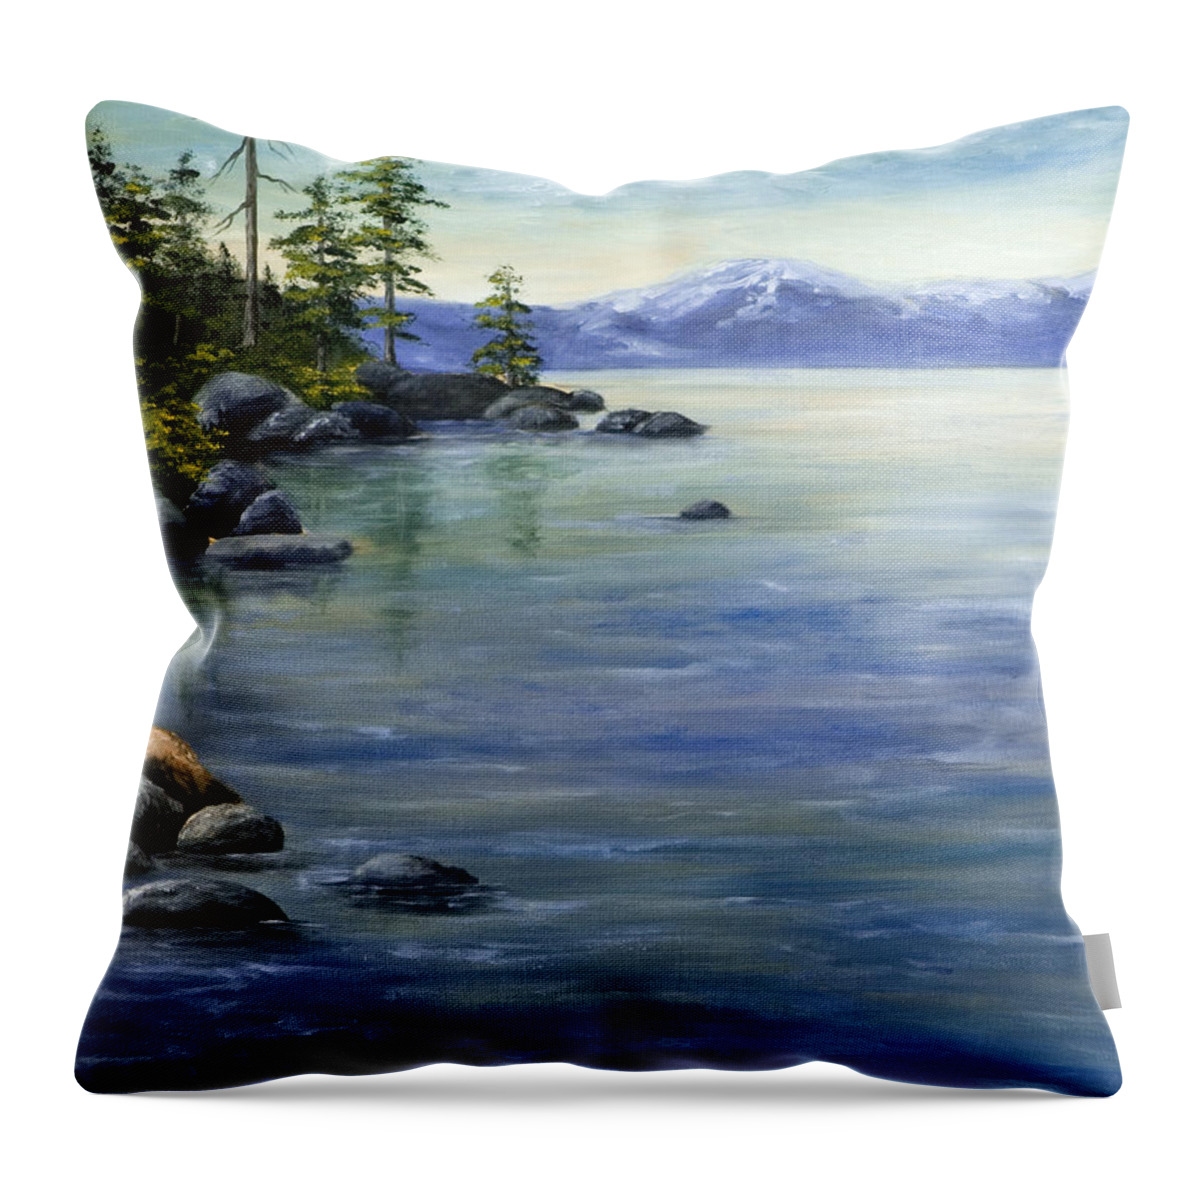 Lake Tahoe Throw Pillow featuring the painting East Shore Lake Tahoe by Darice Machel McGuire